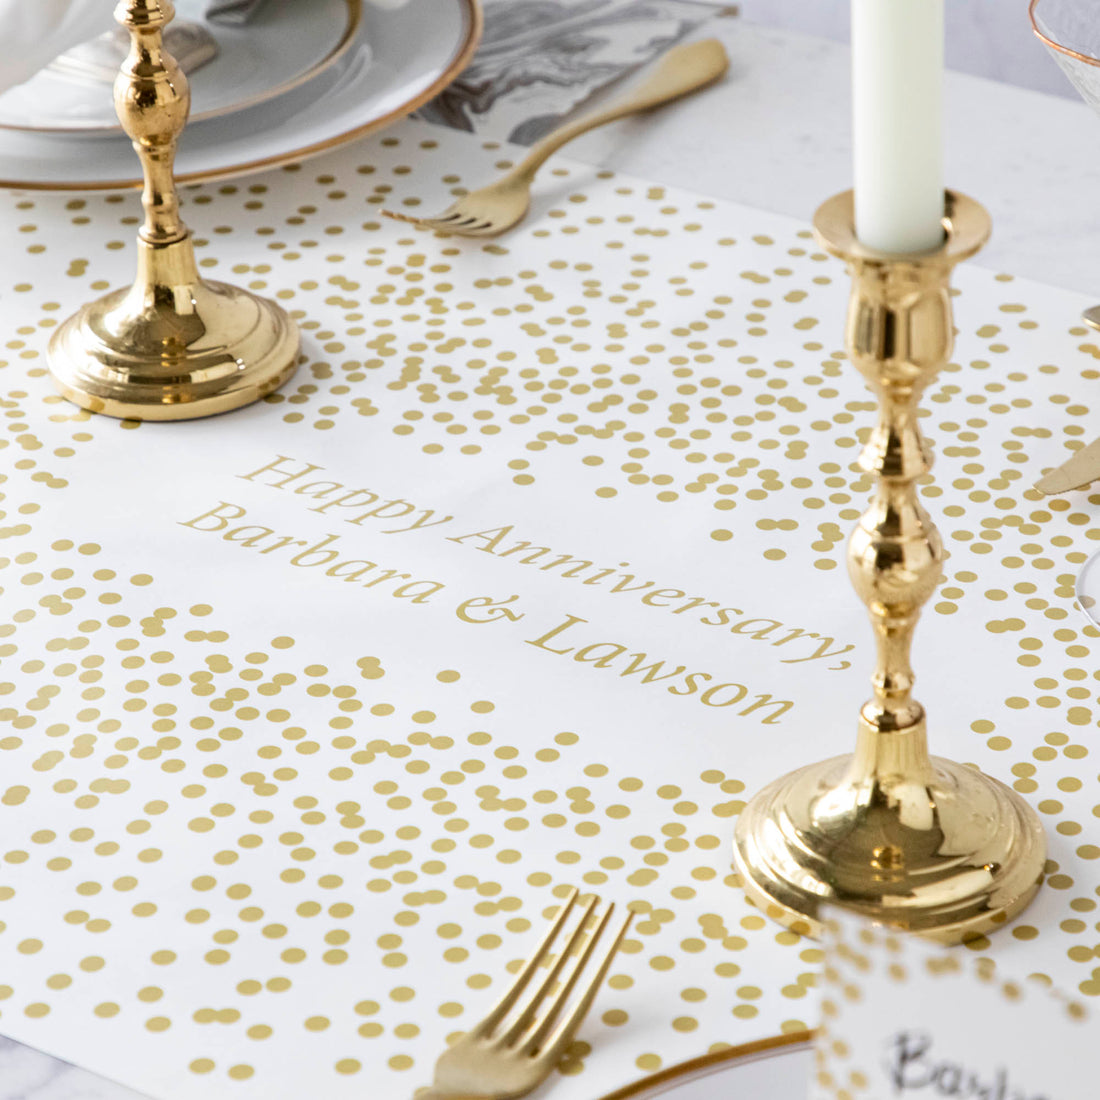 The Gold Confetti Personalized Runner under an elegant table setting, with &quot;Happy Anniversary, Barbara &amp; Lawson&quot; printed in gold in the center.